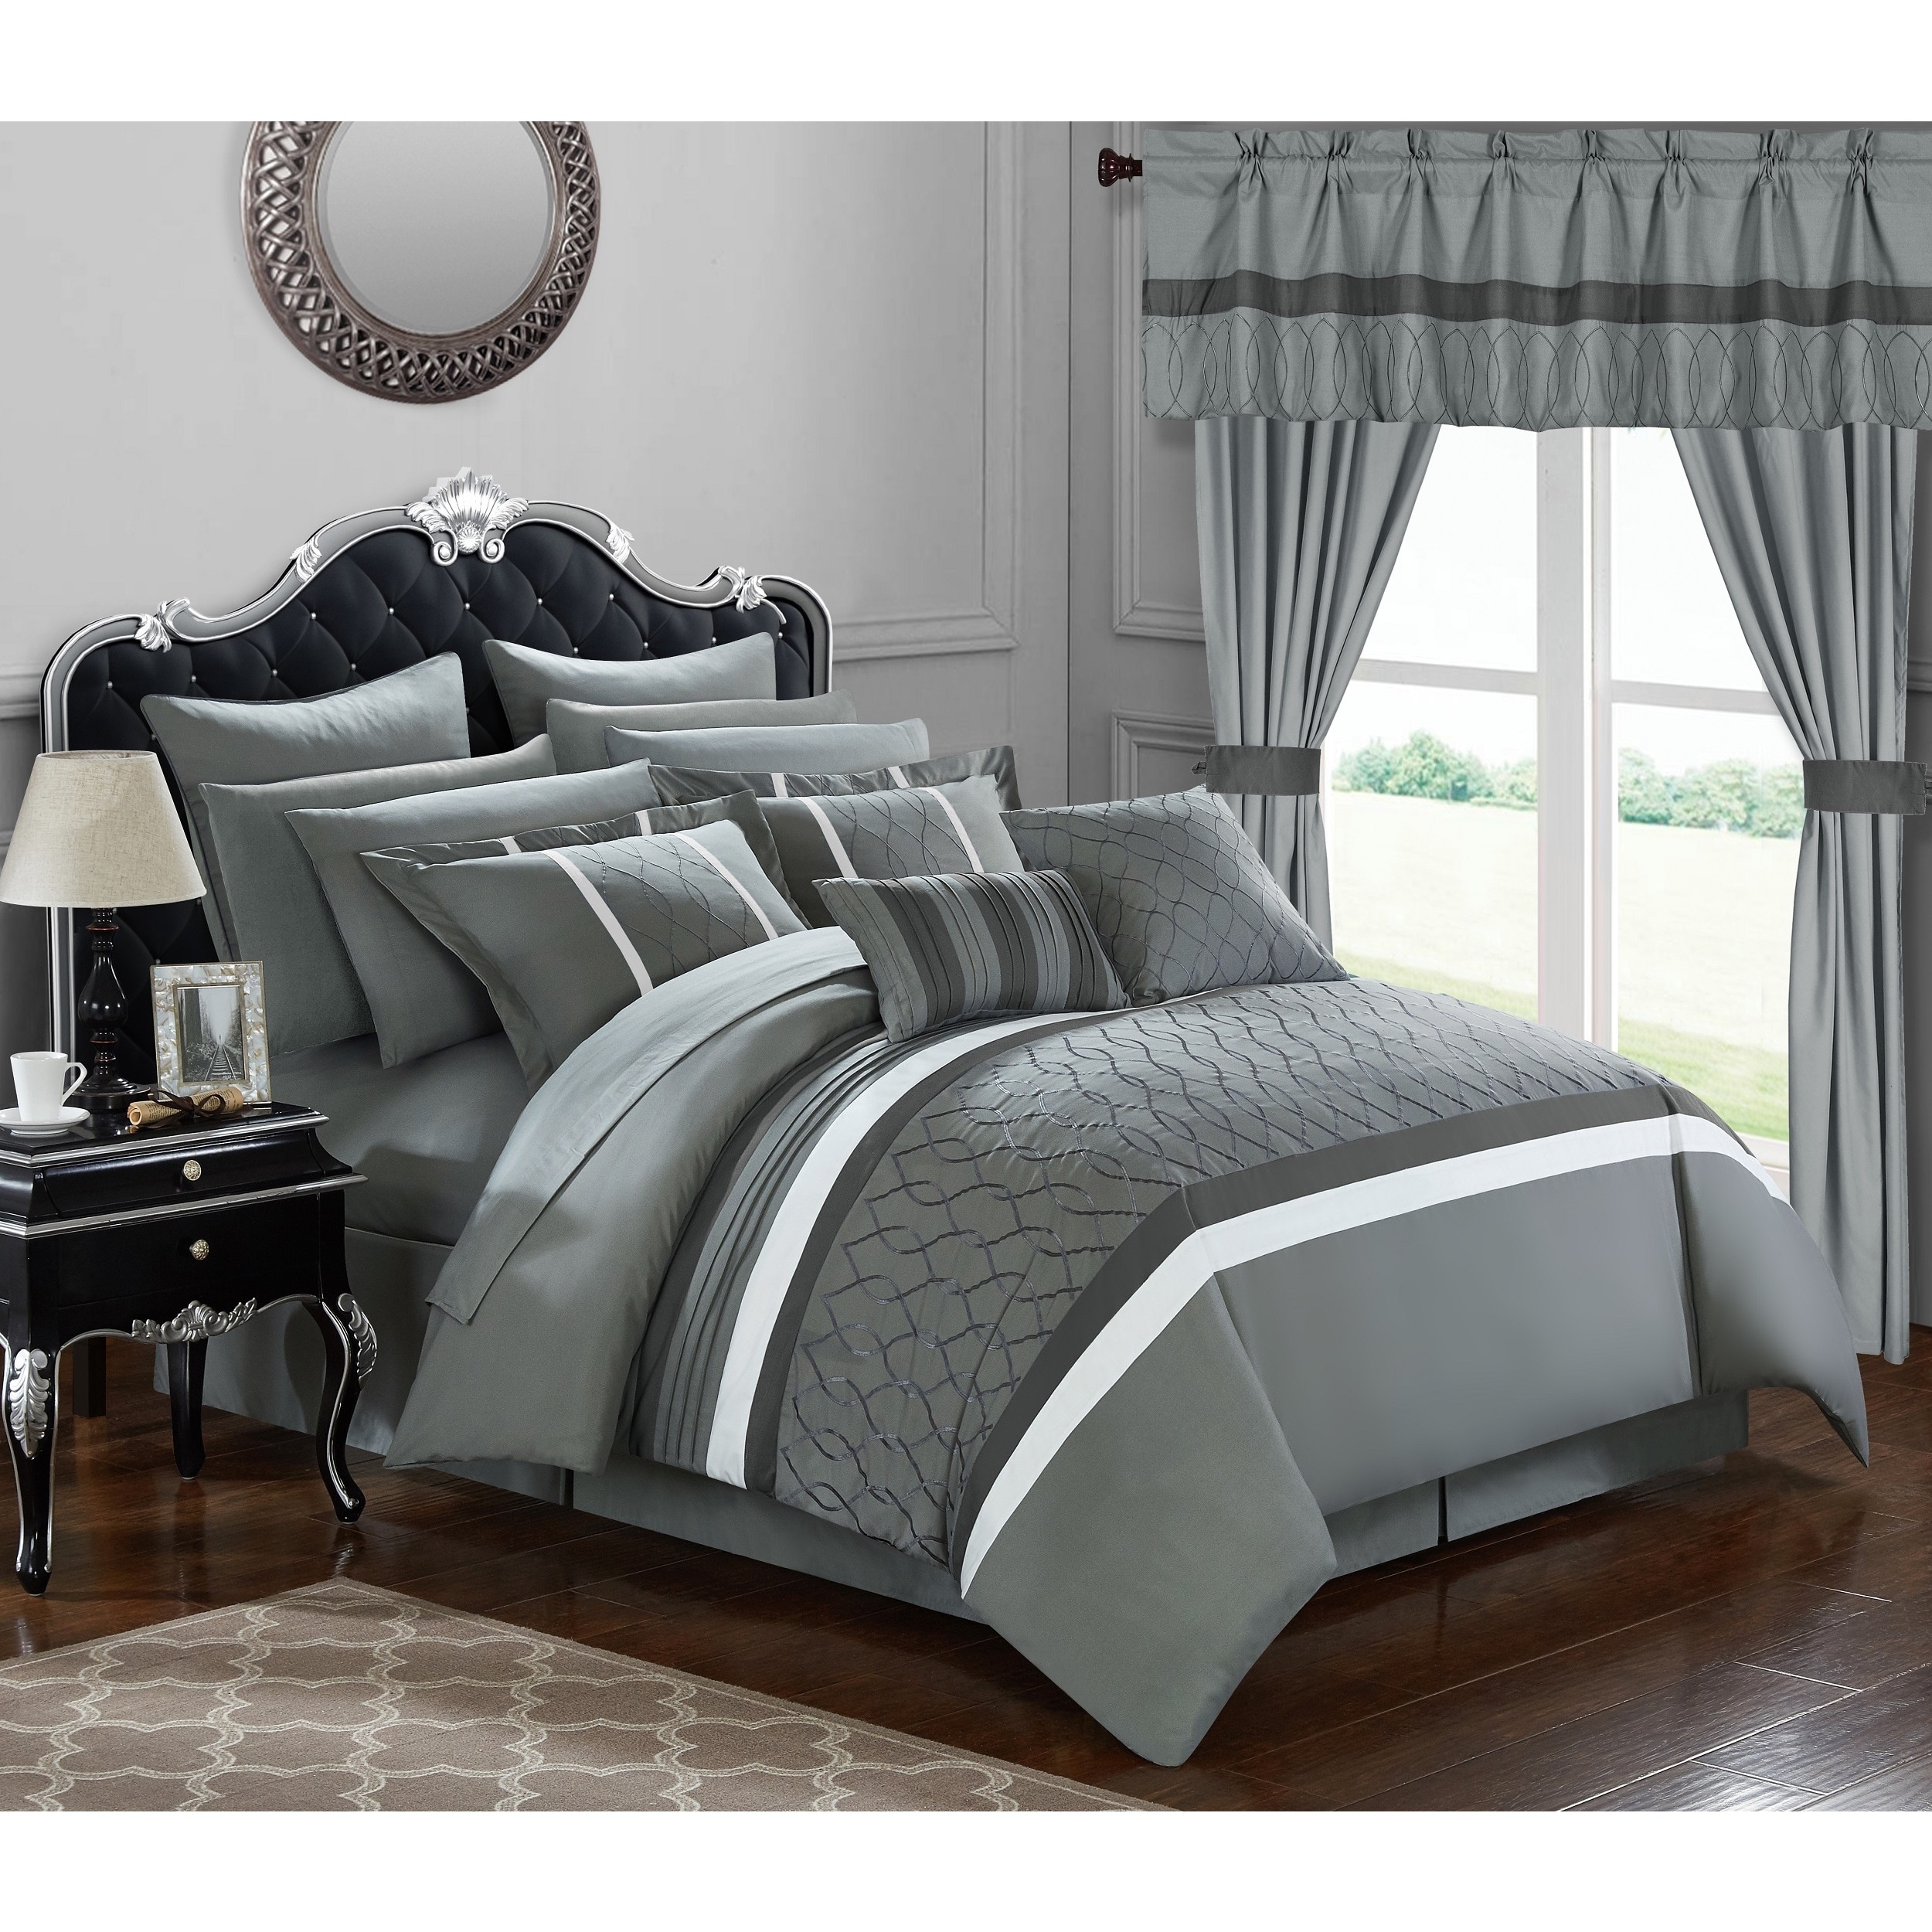 Shop Chic Home 24 Piece Lance King Bed In A Bag Comforter Set On